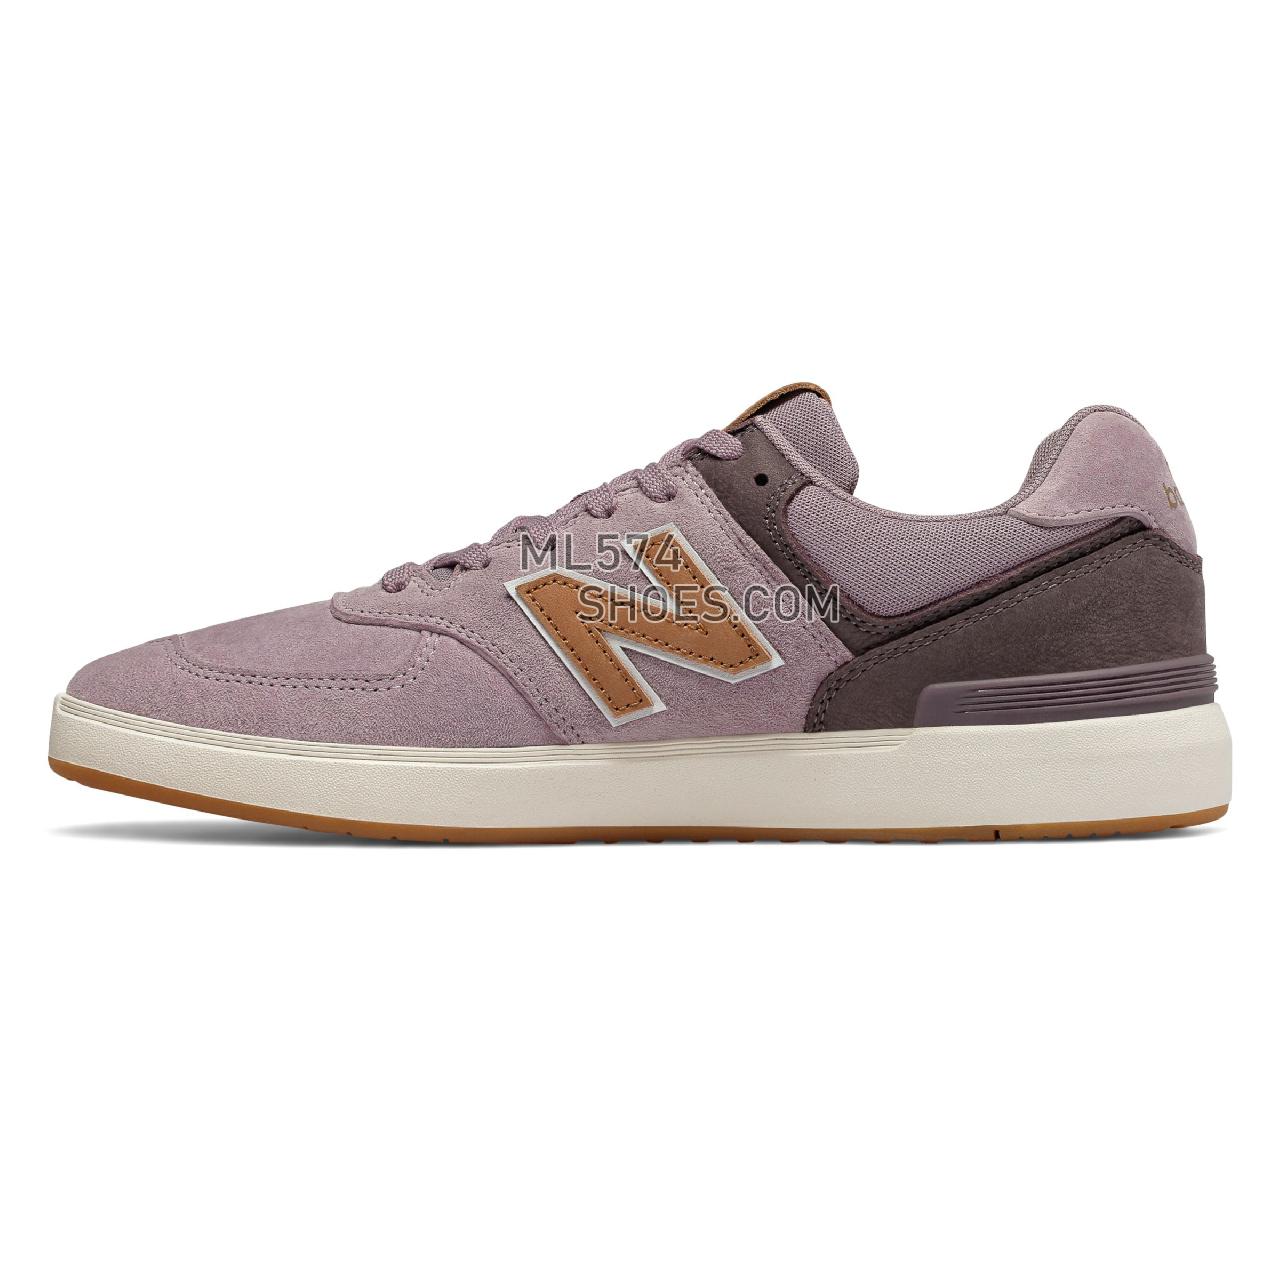 New Balance AM574 - Men's Court Classics - Rose with Tan - AM574CPR